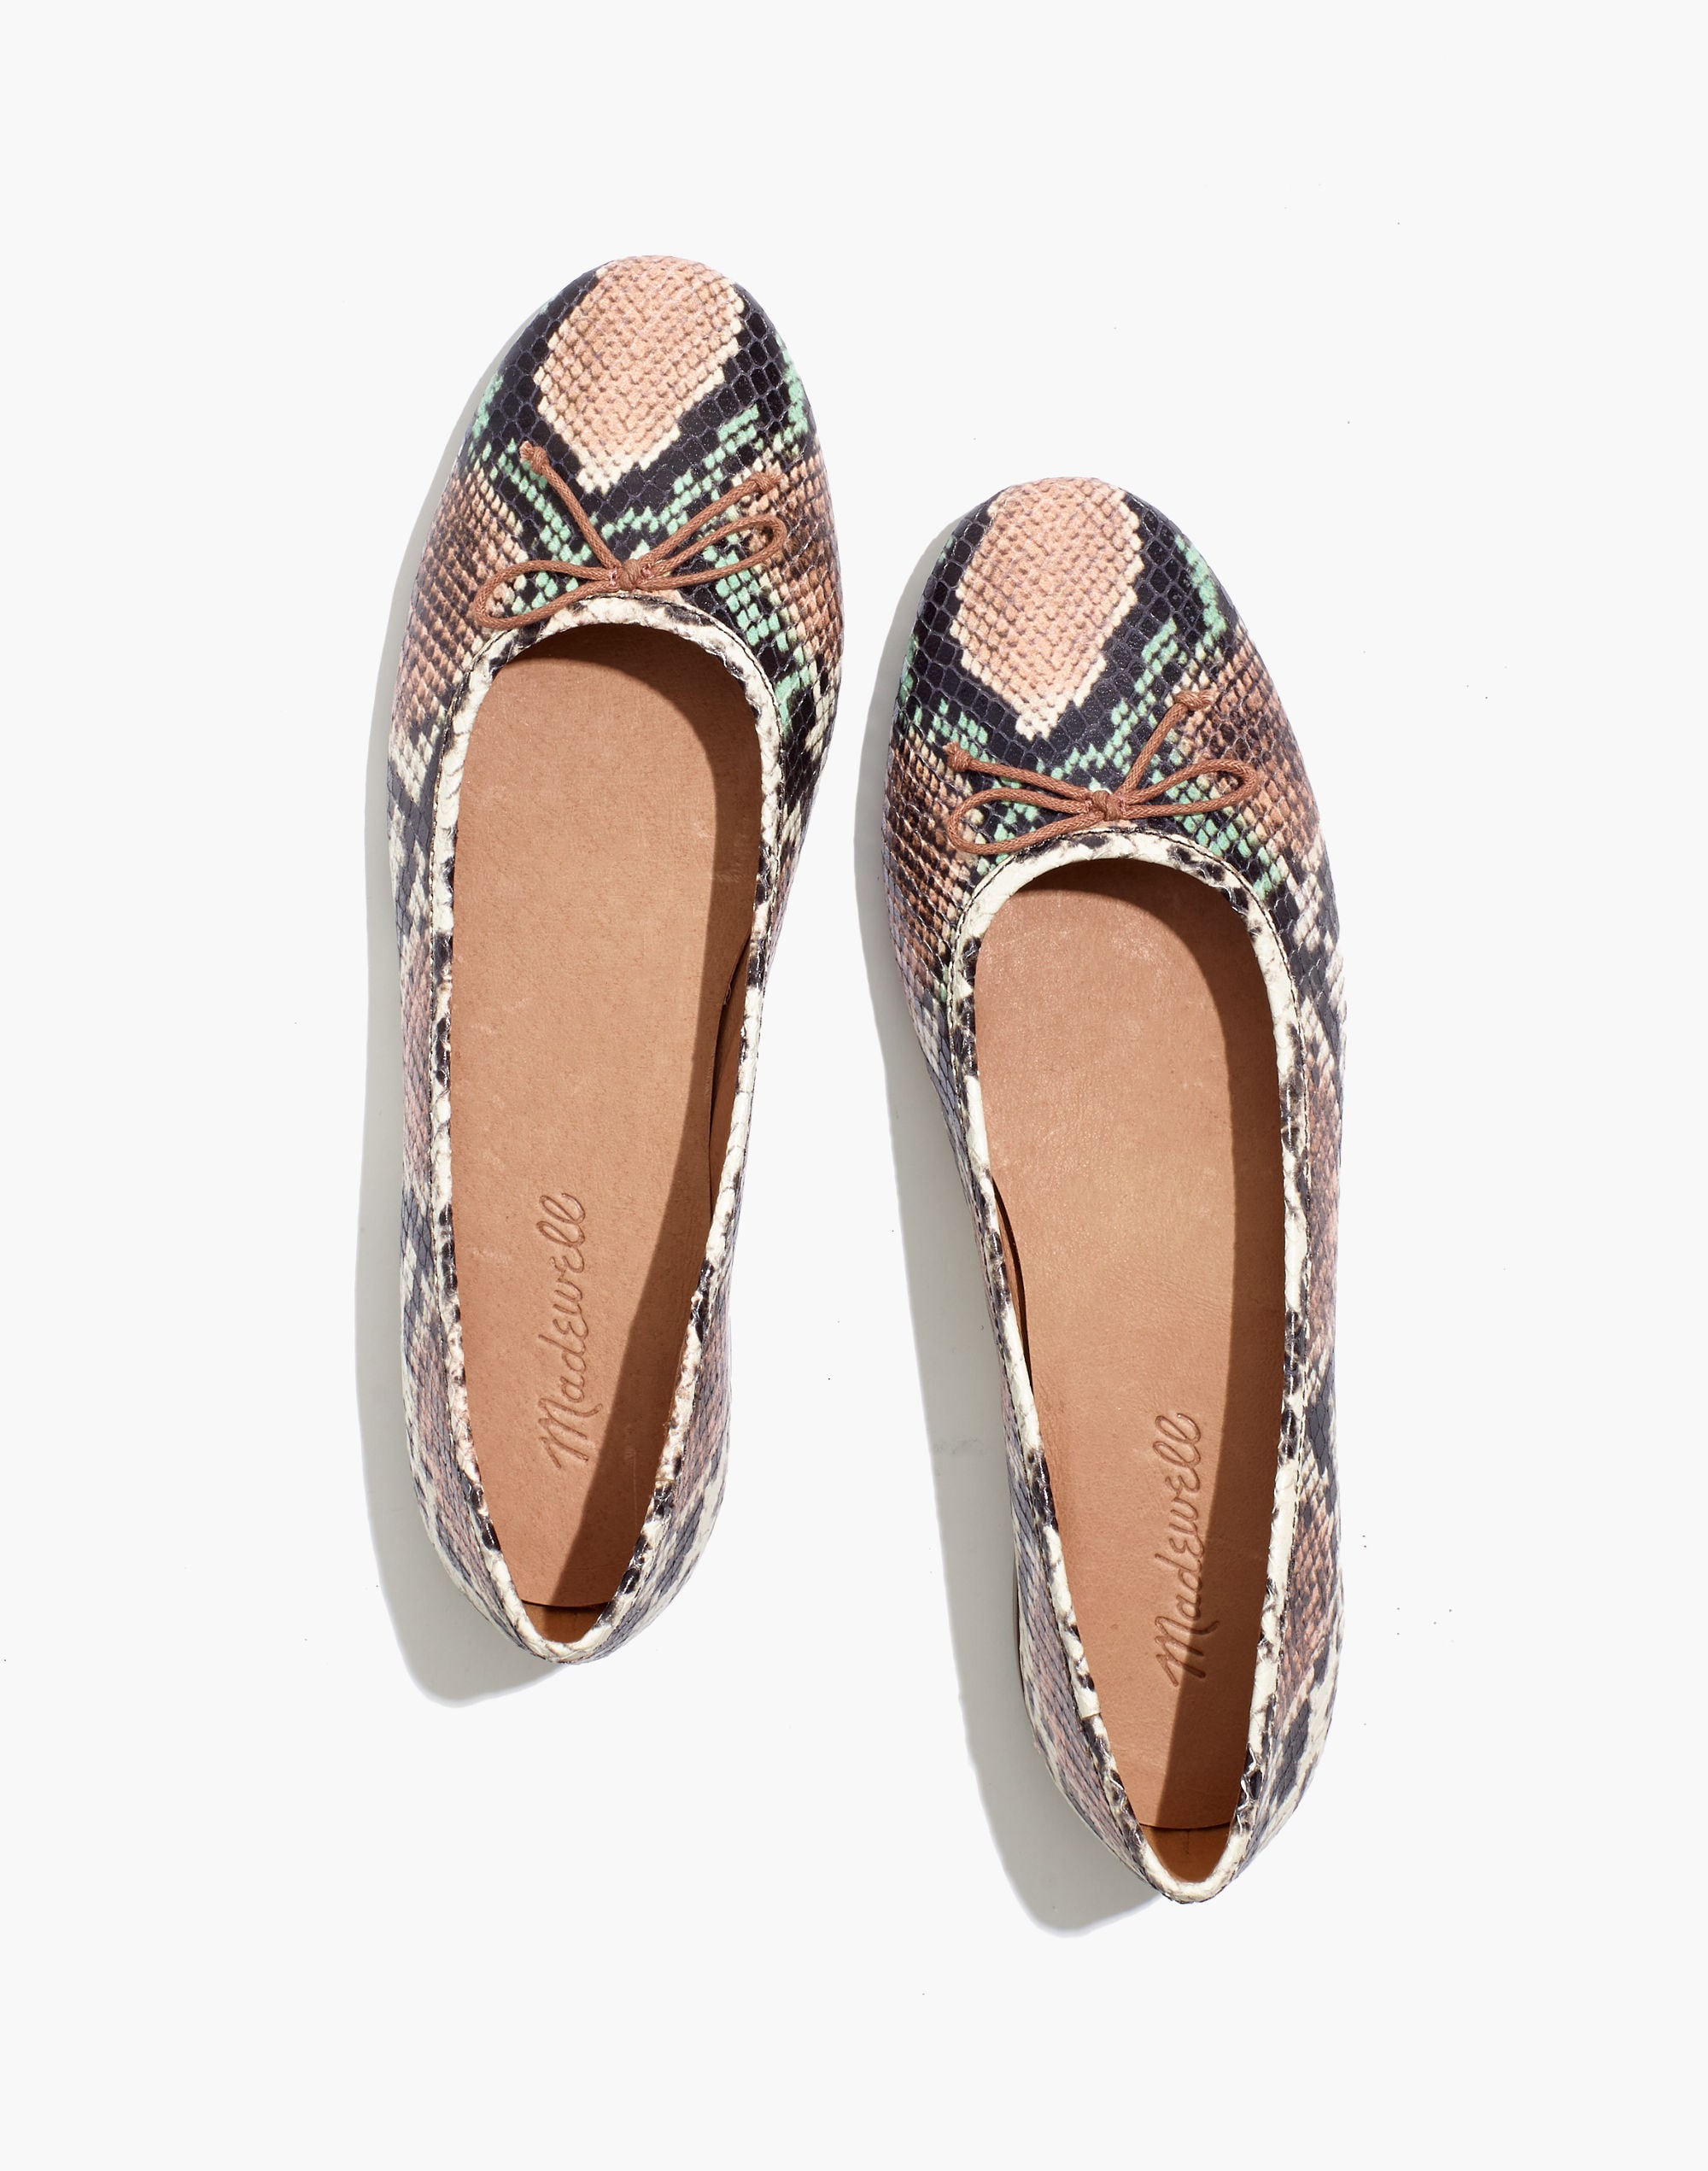 The Adelle Ballet Flat in Snake Embossed Leather